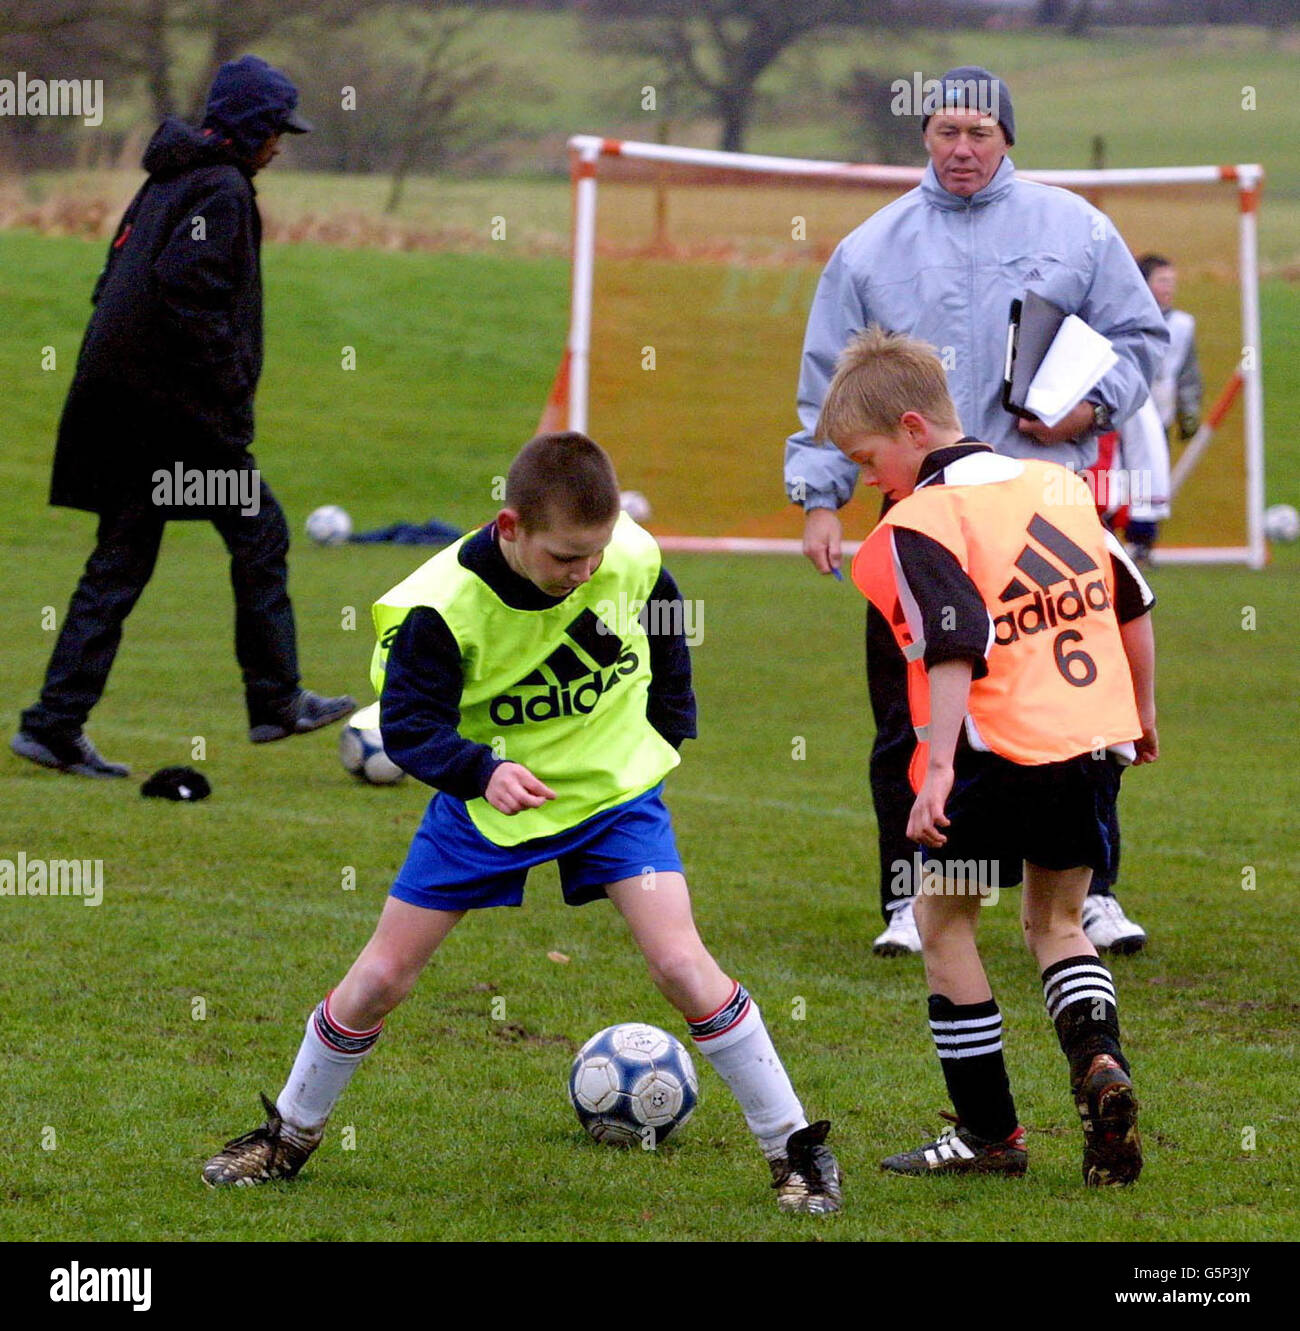 Northern Ireland manager Sammy McLlroy watches Elliott Miller, 11, (right) from Whetston, London, battle with Daniel Blackhall, 11, from West Bromwich during the Fox Kids Cup trials for Team UK, at Mottram Hall, Cheshire. * Fox Kids is embarking on a nationwide hunt for the football stars of tomorrow to play in a six-a-side tournament, the Fox Kids Cup in Barcelona. Stock Photo